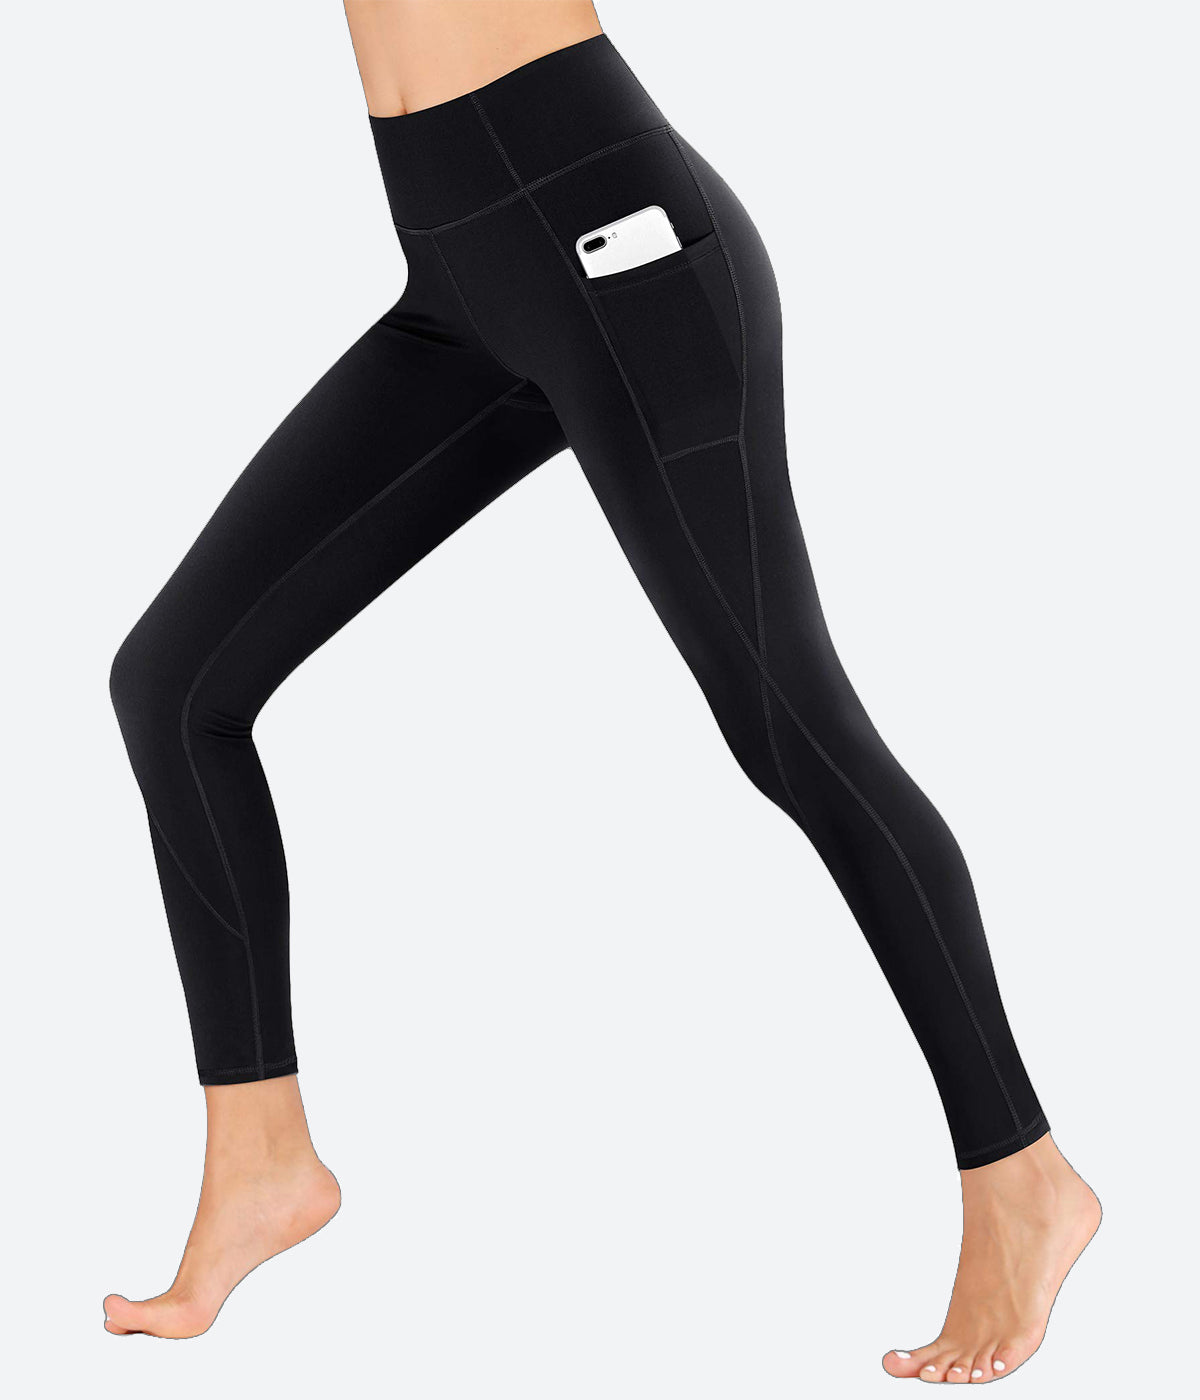 YUHAOTIN Yoga Pants for Women with Pockets High Waisted Ladies